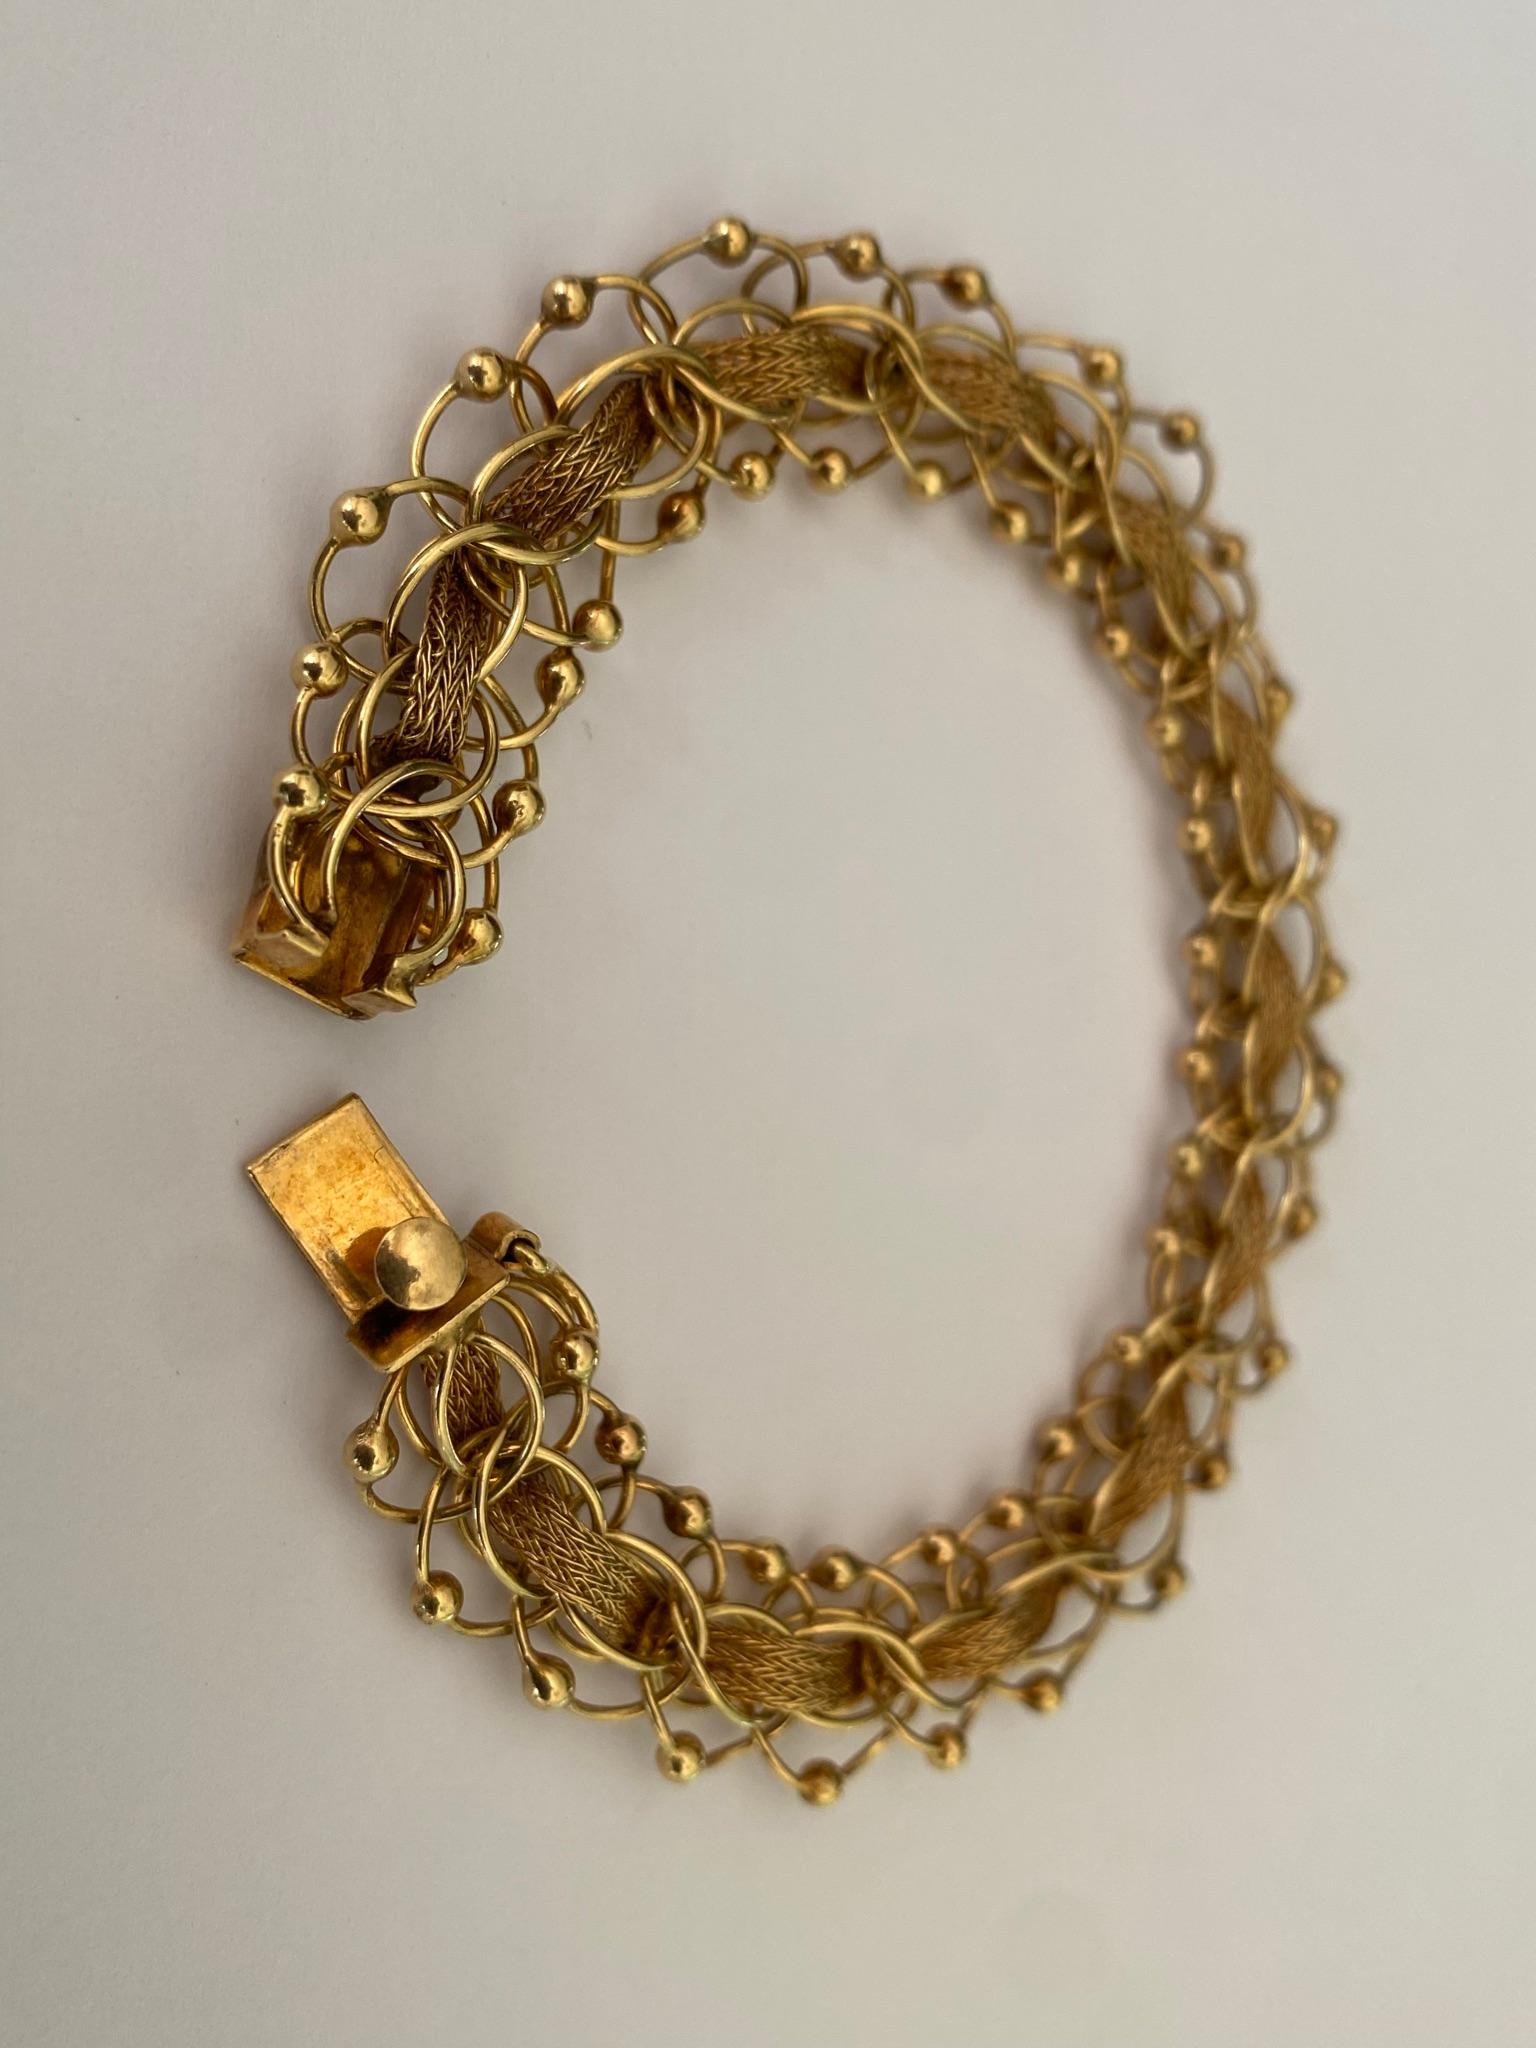 Crafted in the 1950s, this vintage link bracelet features a gold rope and delicate mesh design fashioned in 14kt yellow gold. The bracelet measures 7 inches. 
